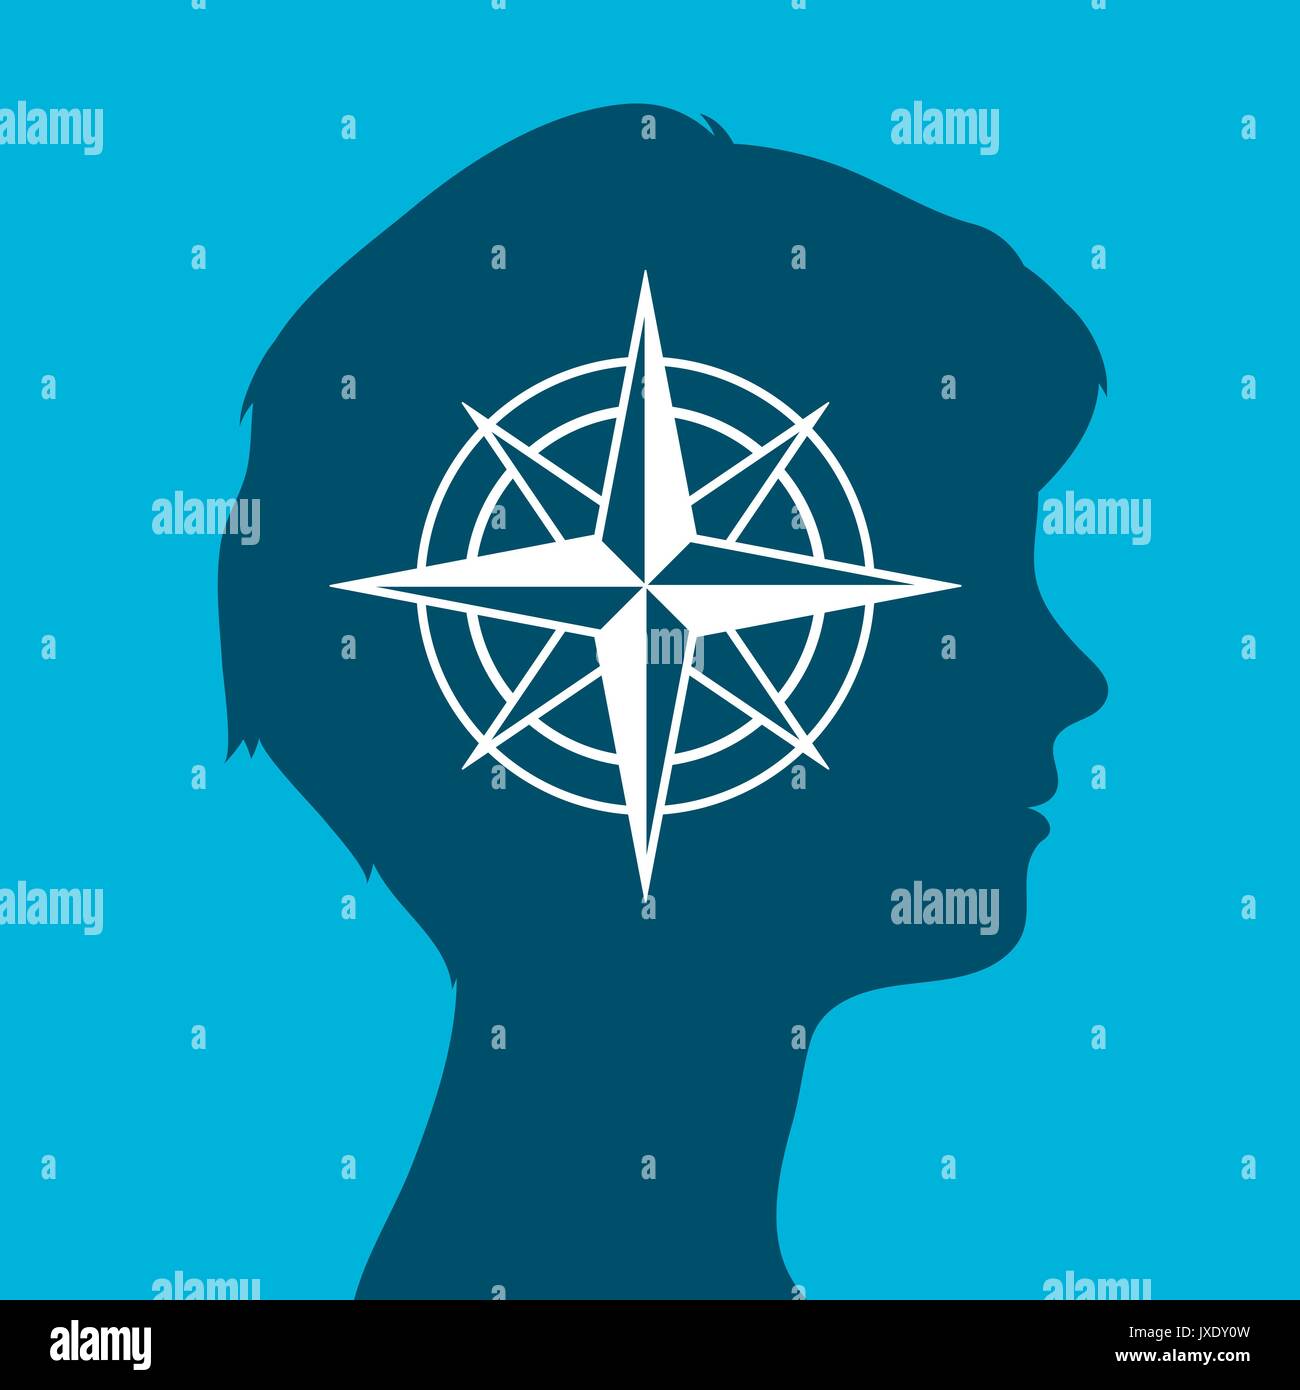 Sign of an isolated female head silhouette icon with a compass rose, vector illustration Stock Vector